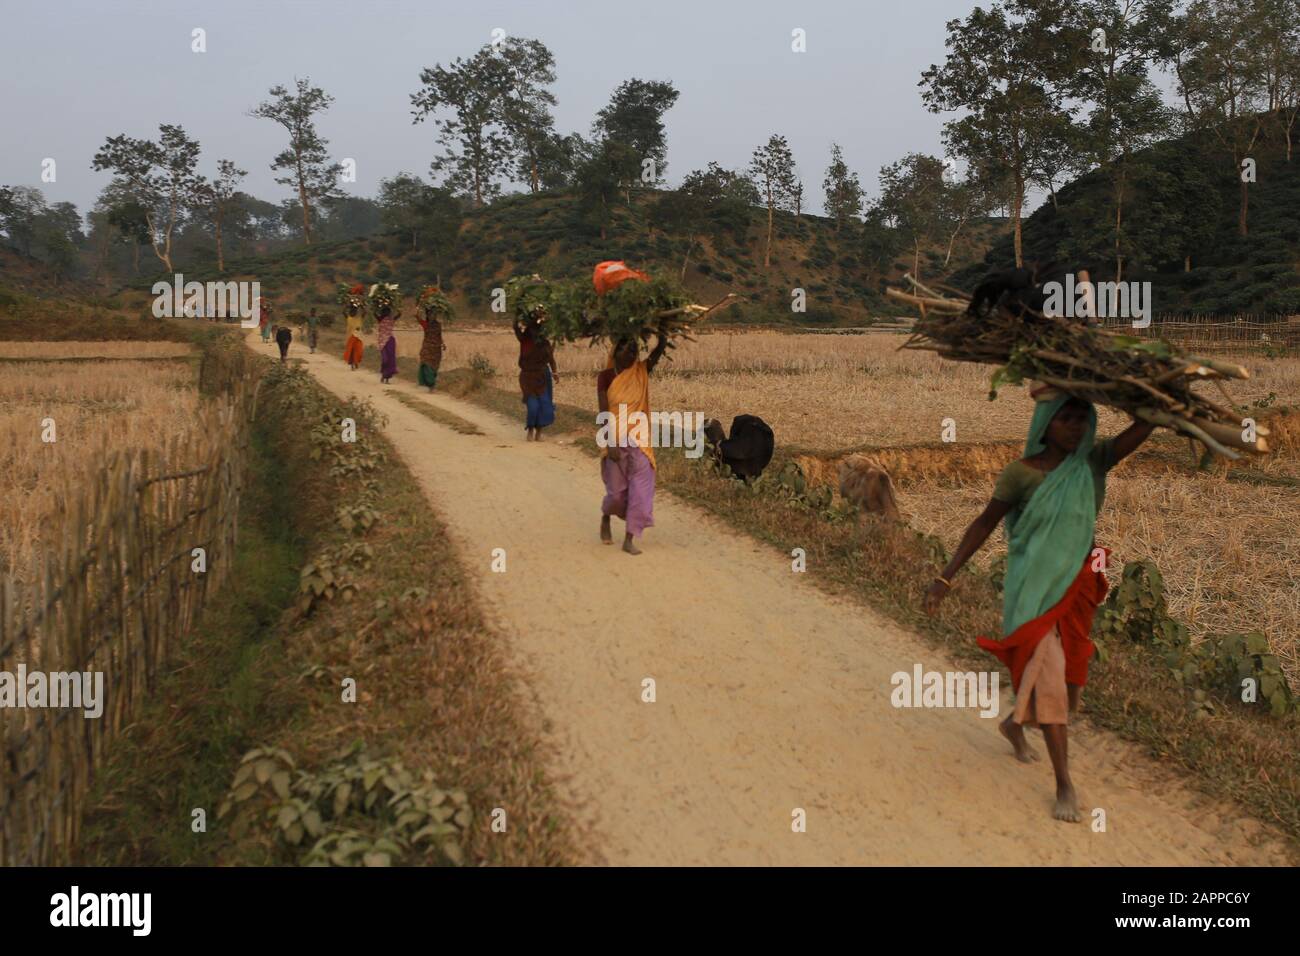 January 24, 2020, Sreemangal, Bangladesh: Rural women carry firewood on their heads during the sunset on the outskirts of Shreemangal, Moulvibazar district. (Credit Image: © MD Mehedi Hasan/ZUMA Wire) Stock Photo